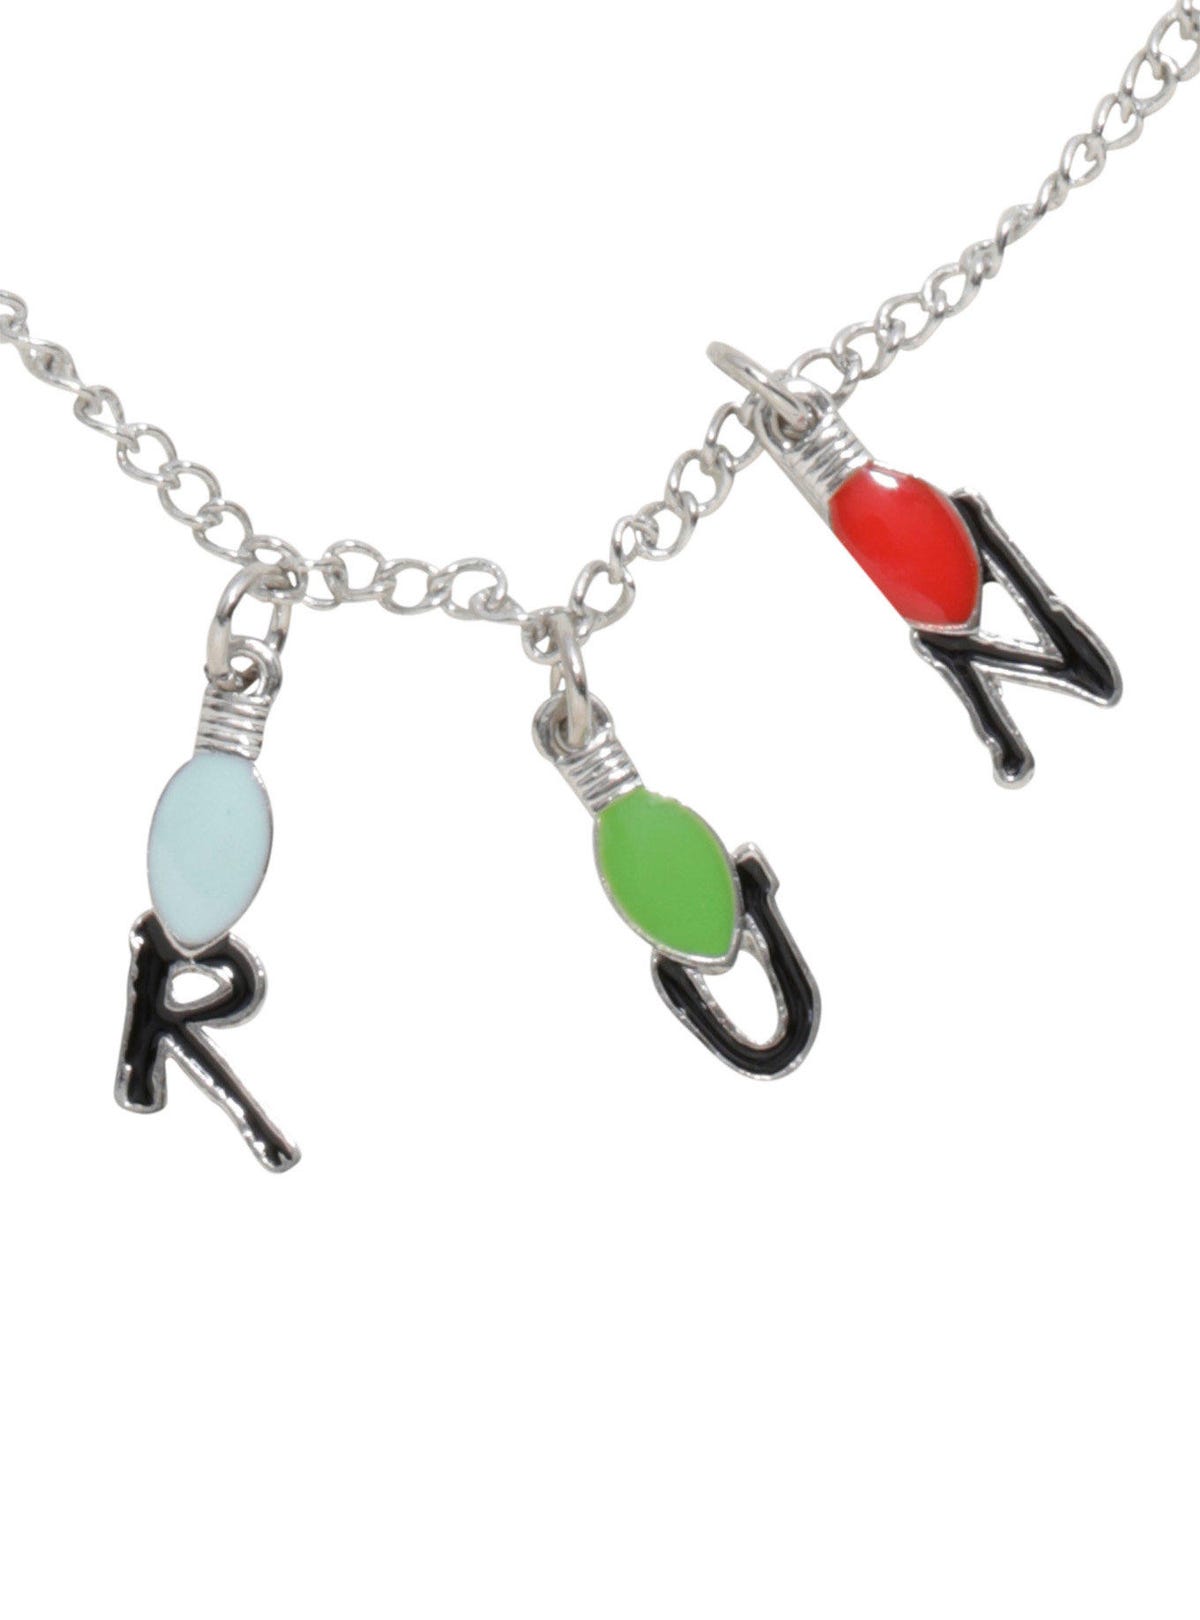 runnecklace-hottopic-2